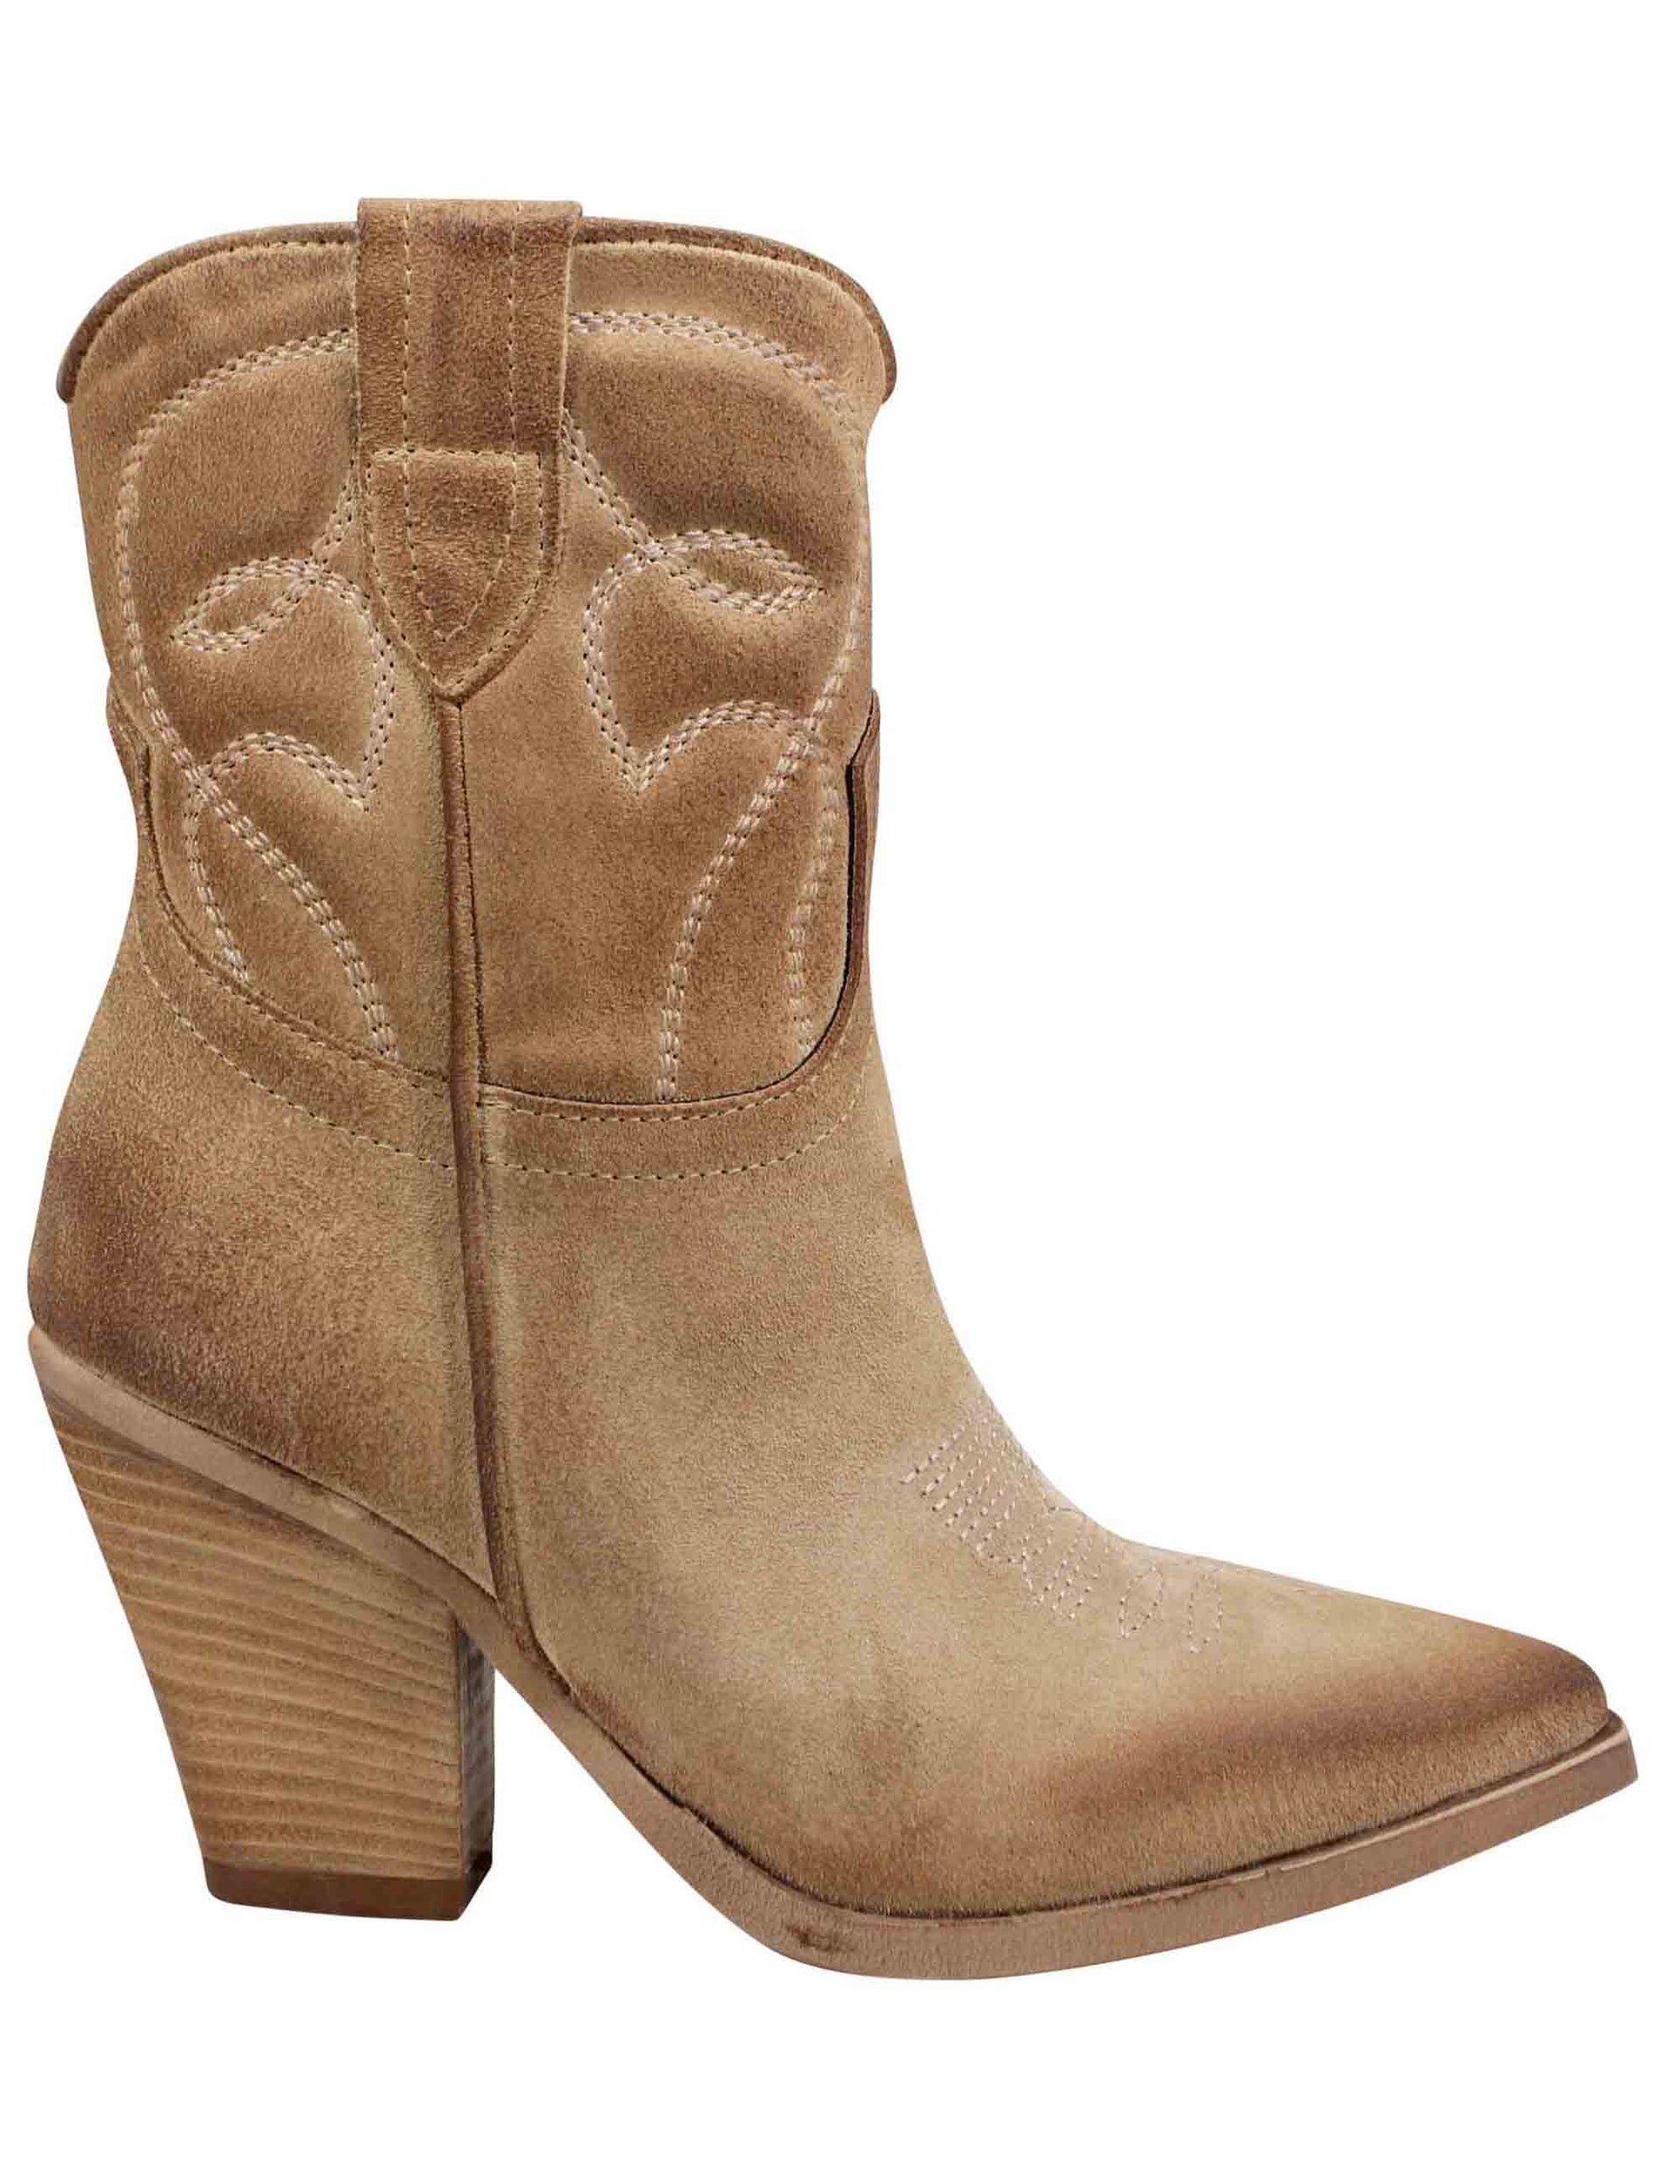 Women's Texan boots in beige leather with high heel